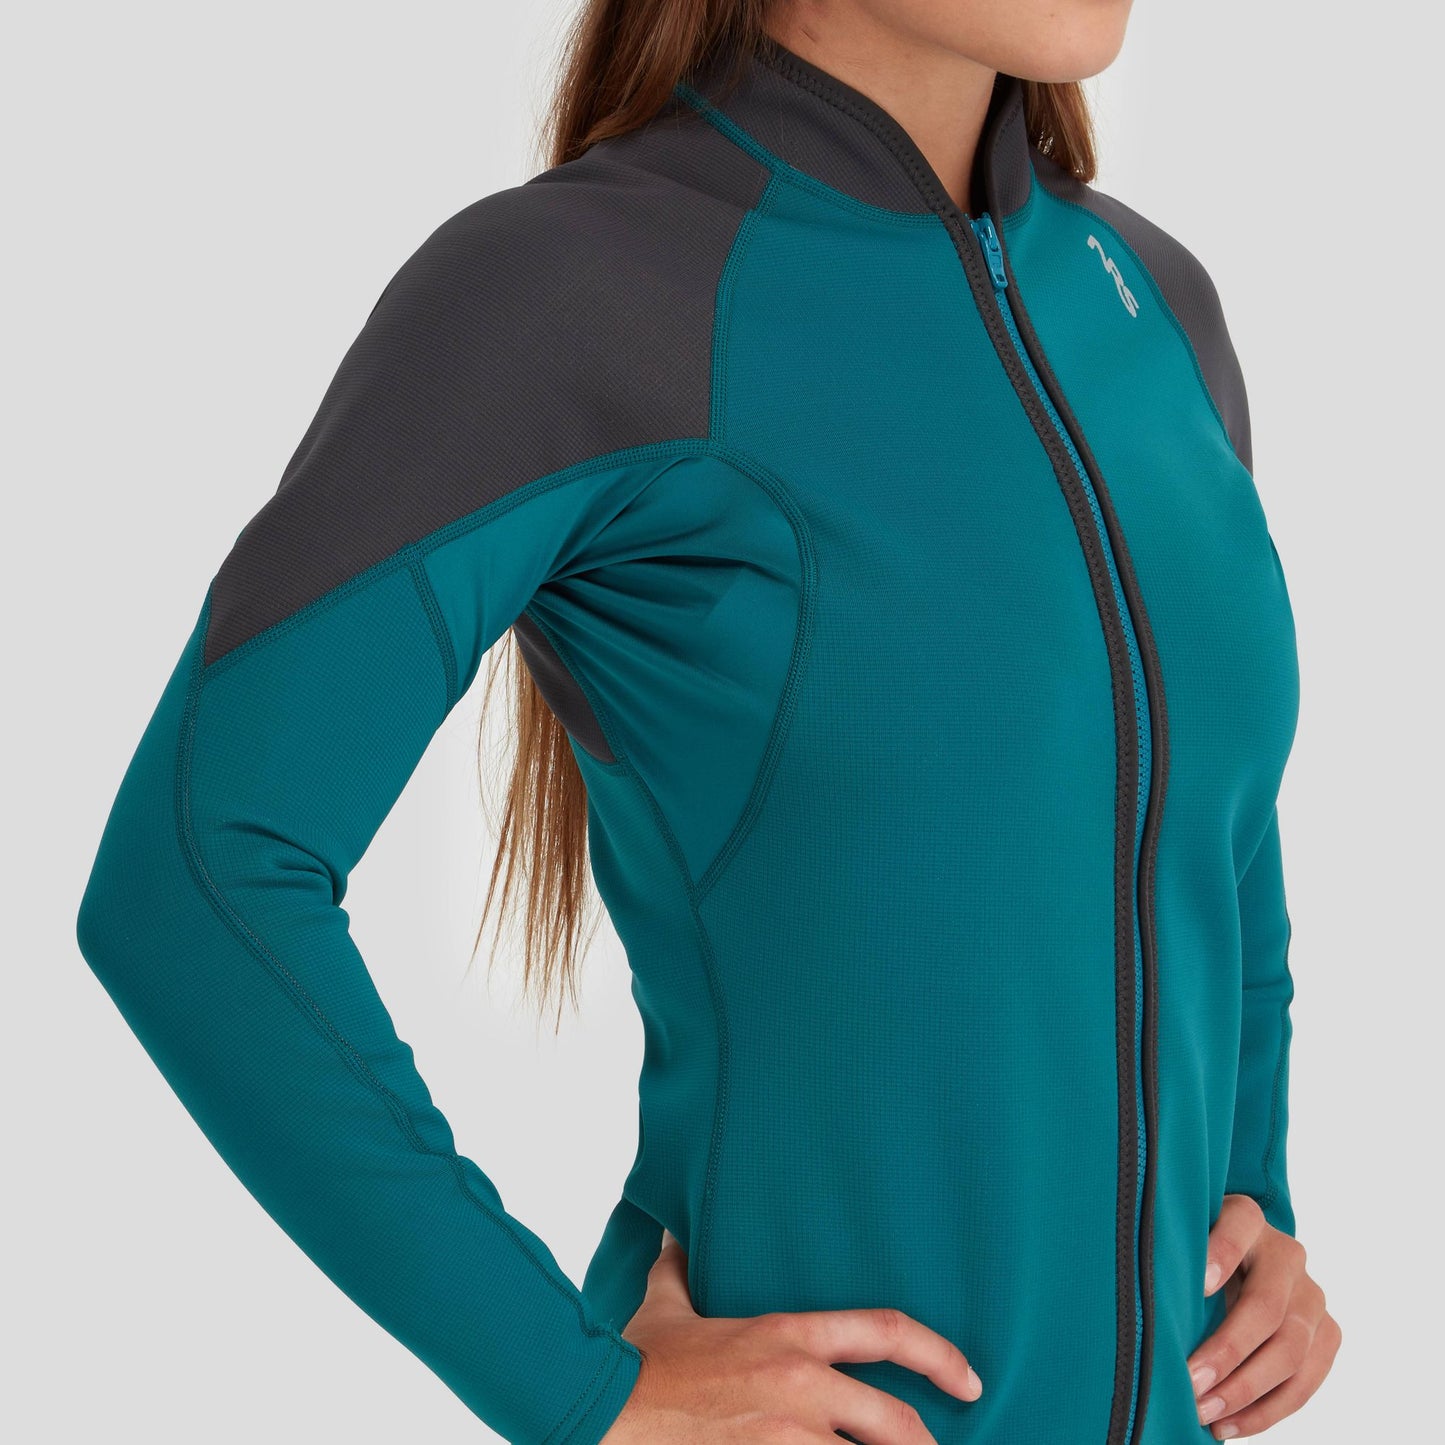 A woman donning an NRS Hydroskin 0.5 Jacket - Women's, an essential in any layering arsenal for its water retention capabilities.